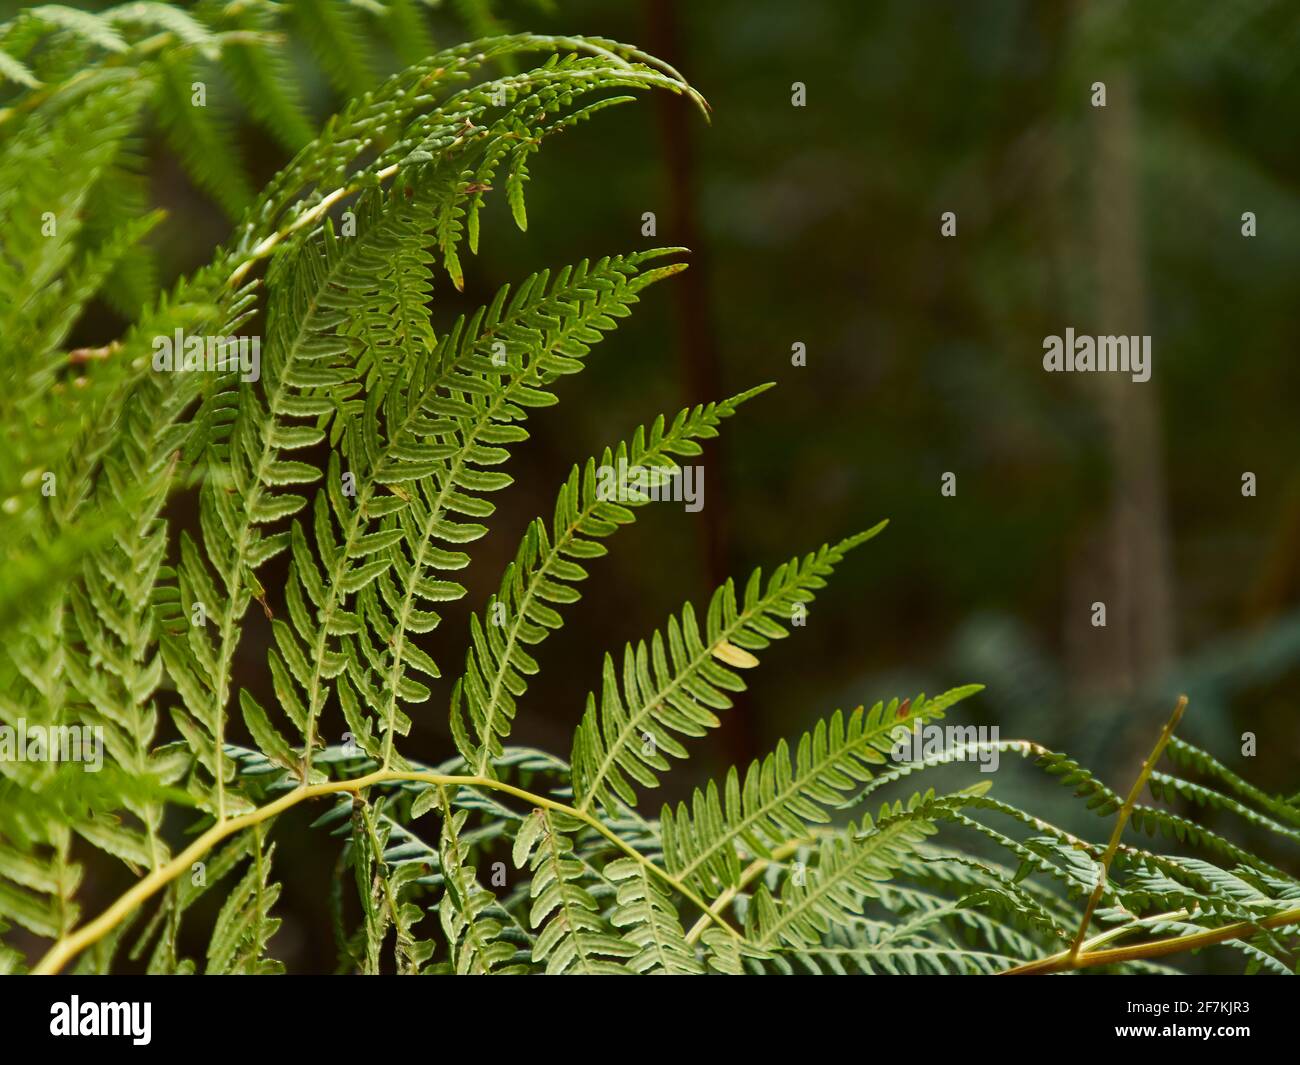 A New Forest bracken frond rolls across the frame like a bright green wave, capturing the detail and fractal symmetry of its leaves and branch. Stock Photo